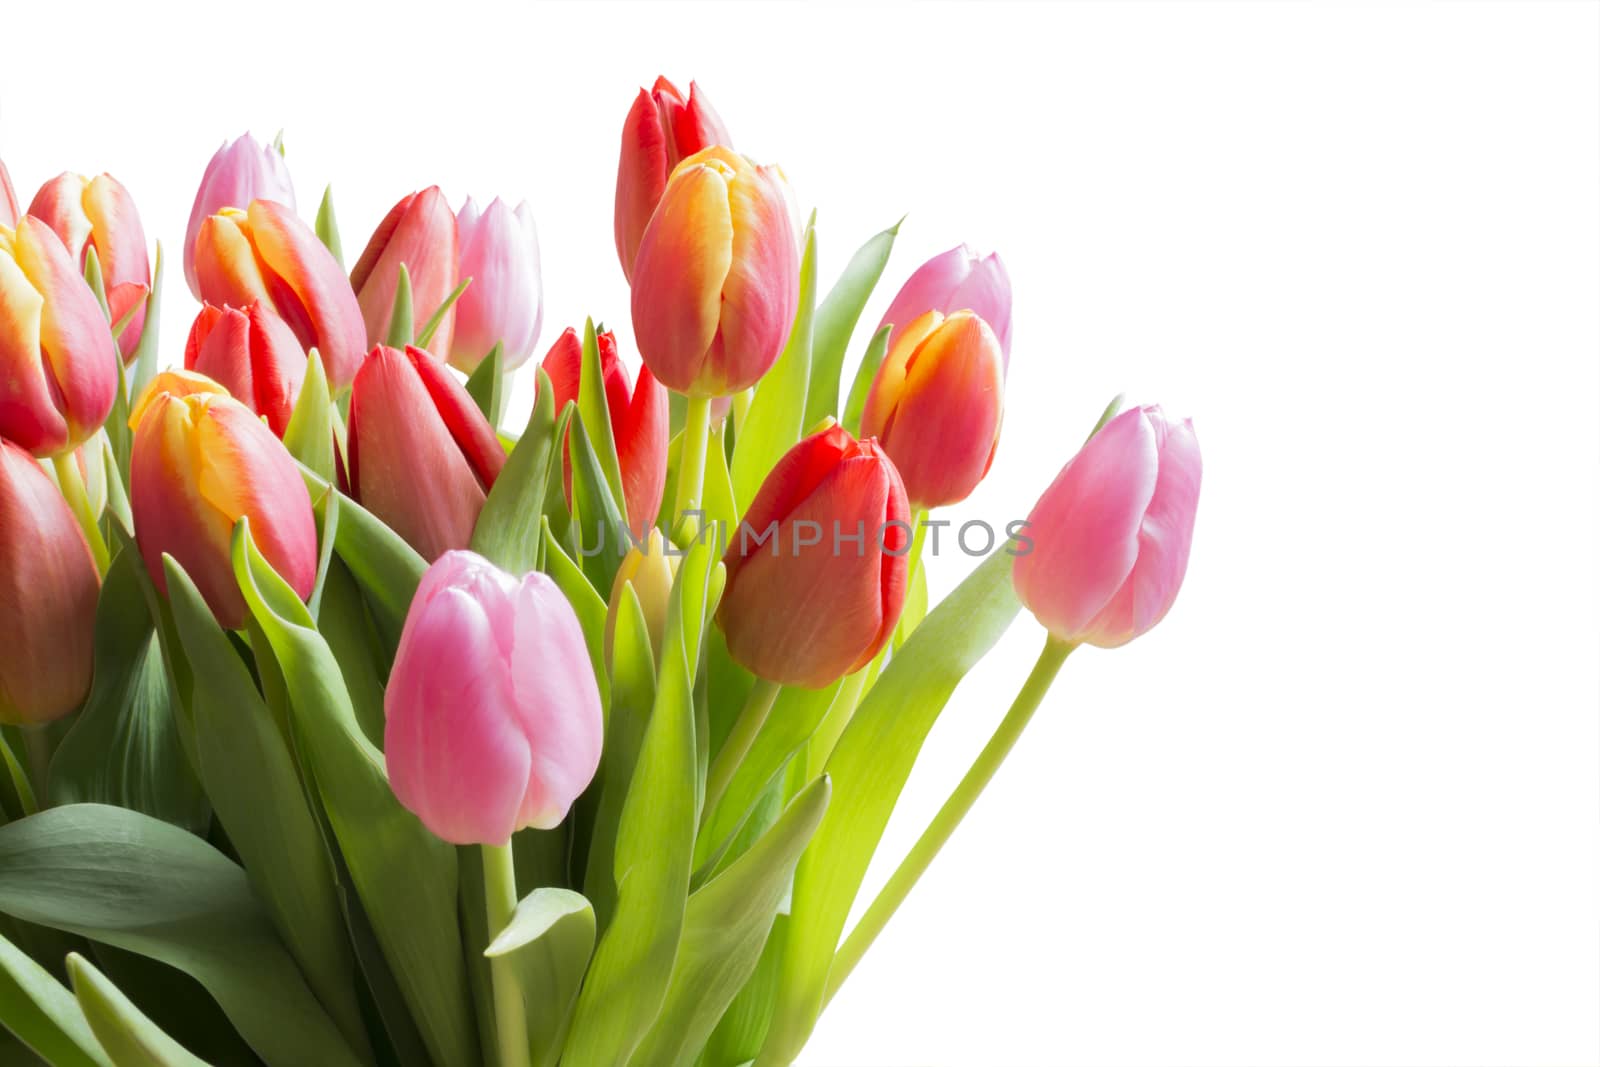 Spring color tulips in a bouquet with pink, red beautiful flowers isolated on white.